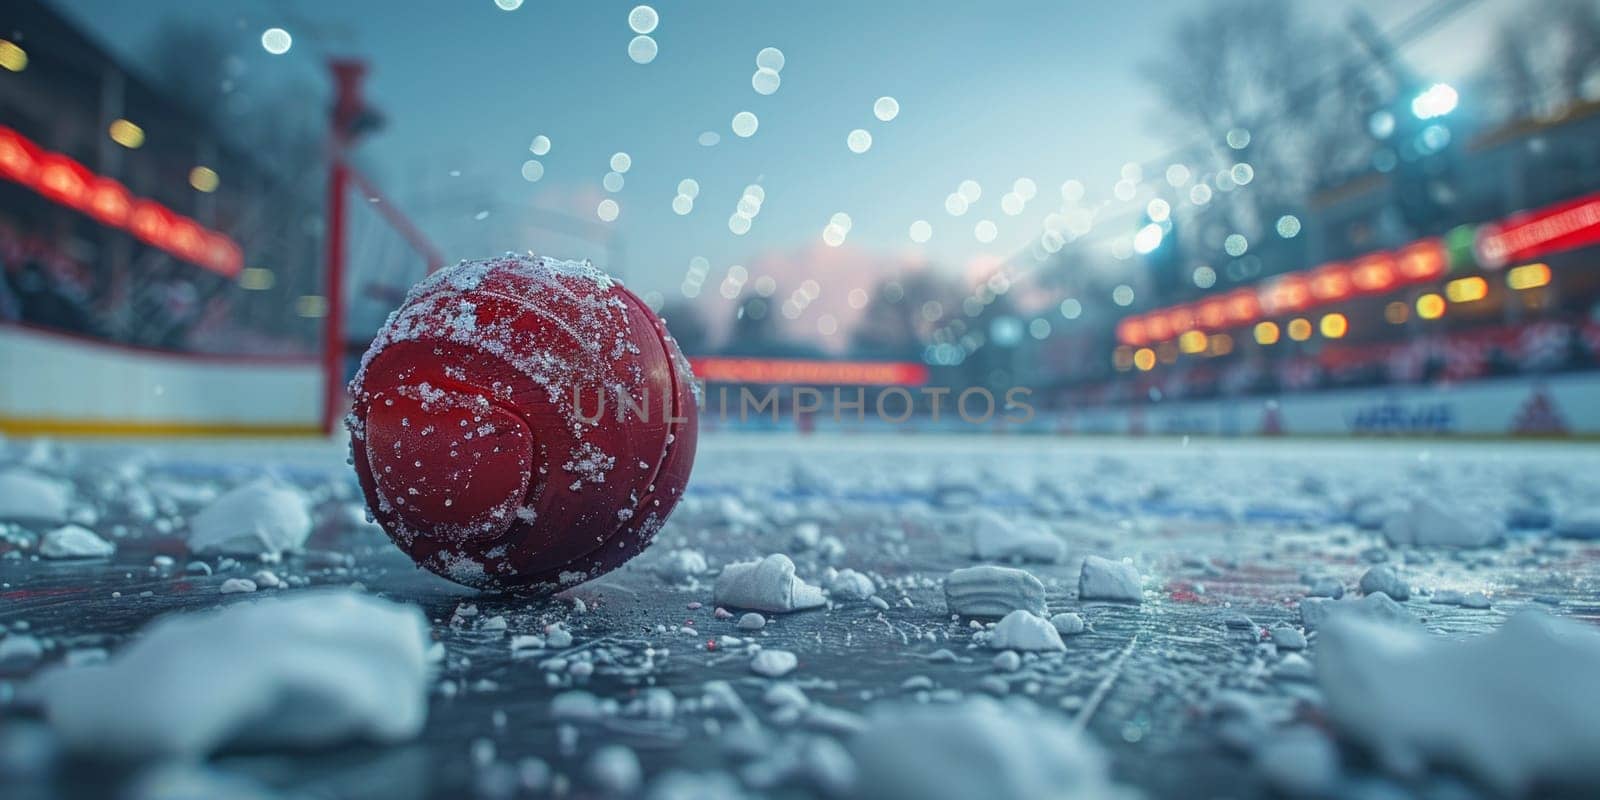 A vibrant red ball, resembling a hockey puck, peacefully sits atop a serene blanket of snow on the ground by but_photo